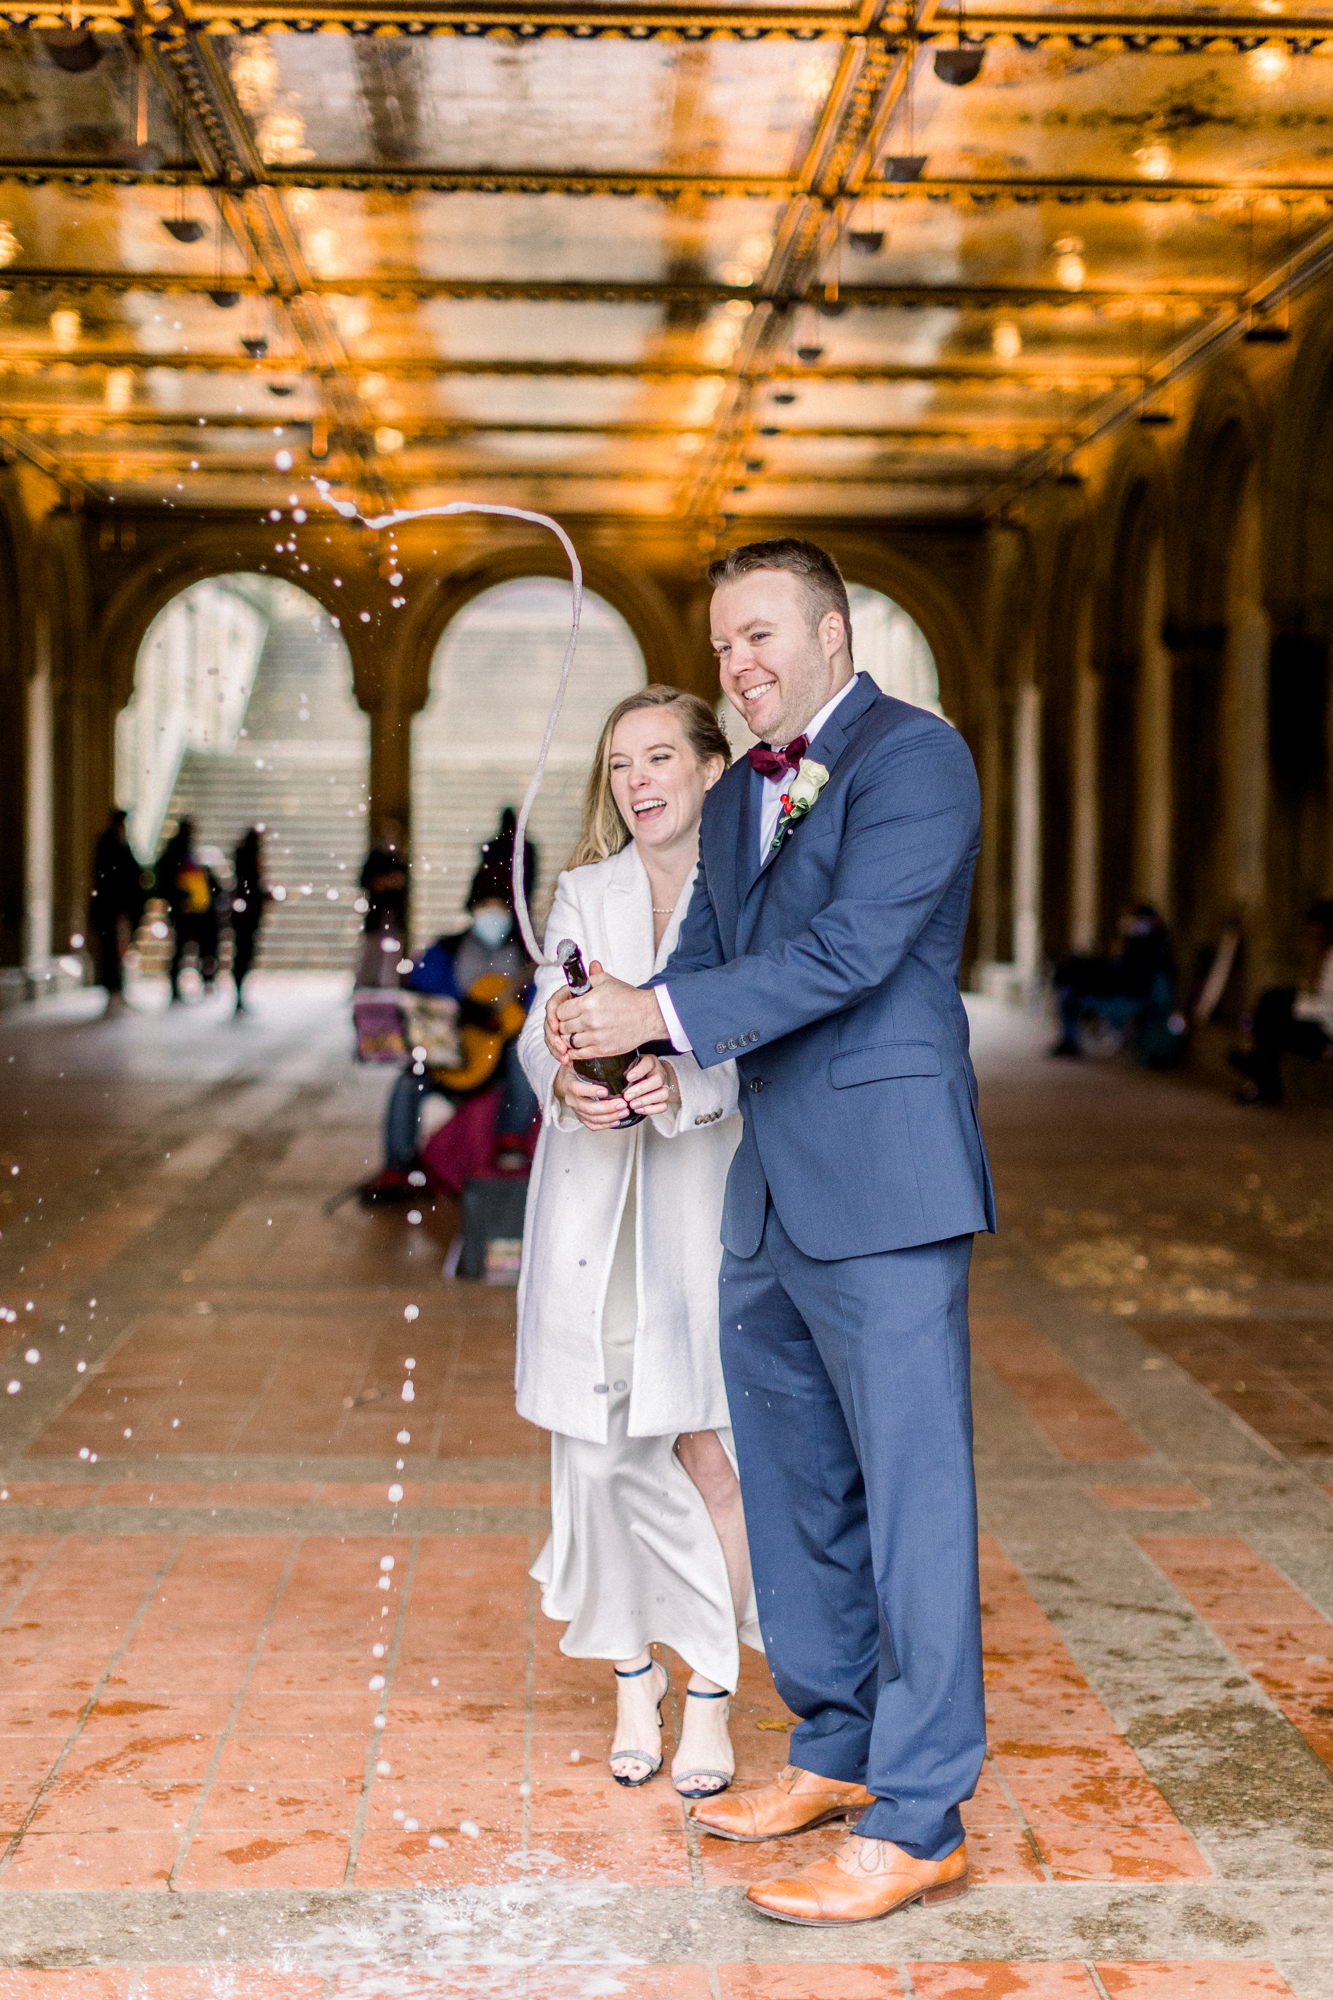 Fun candid elopement photos in Central Park NYC